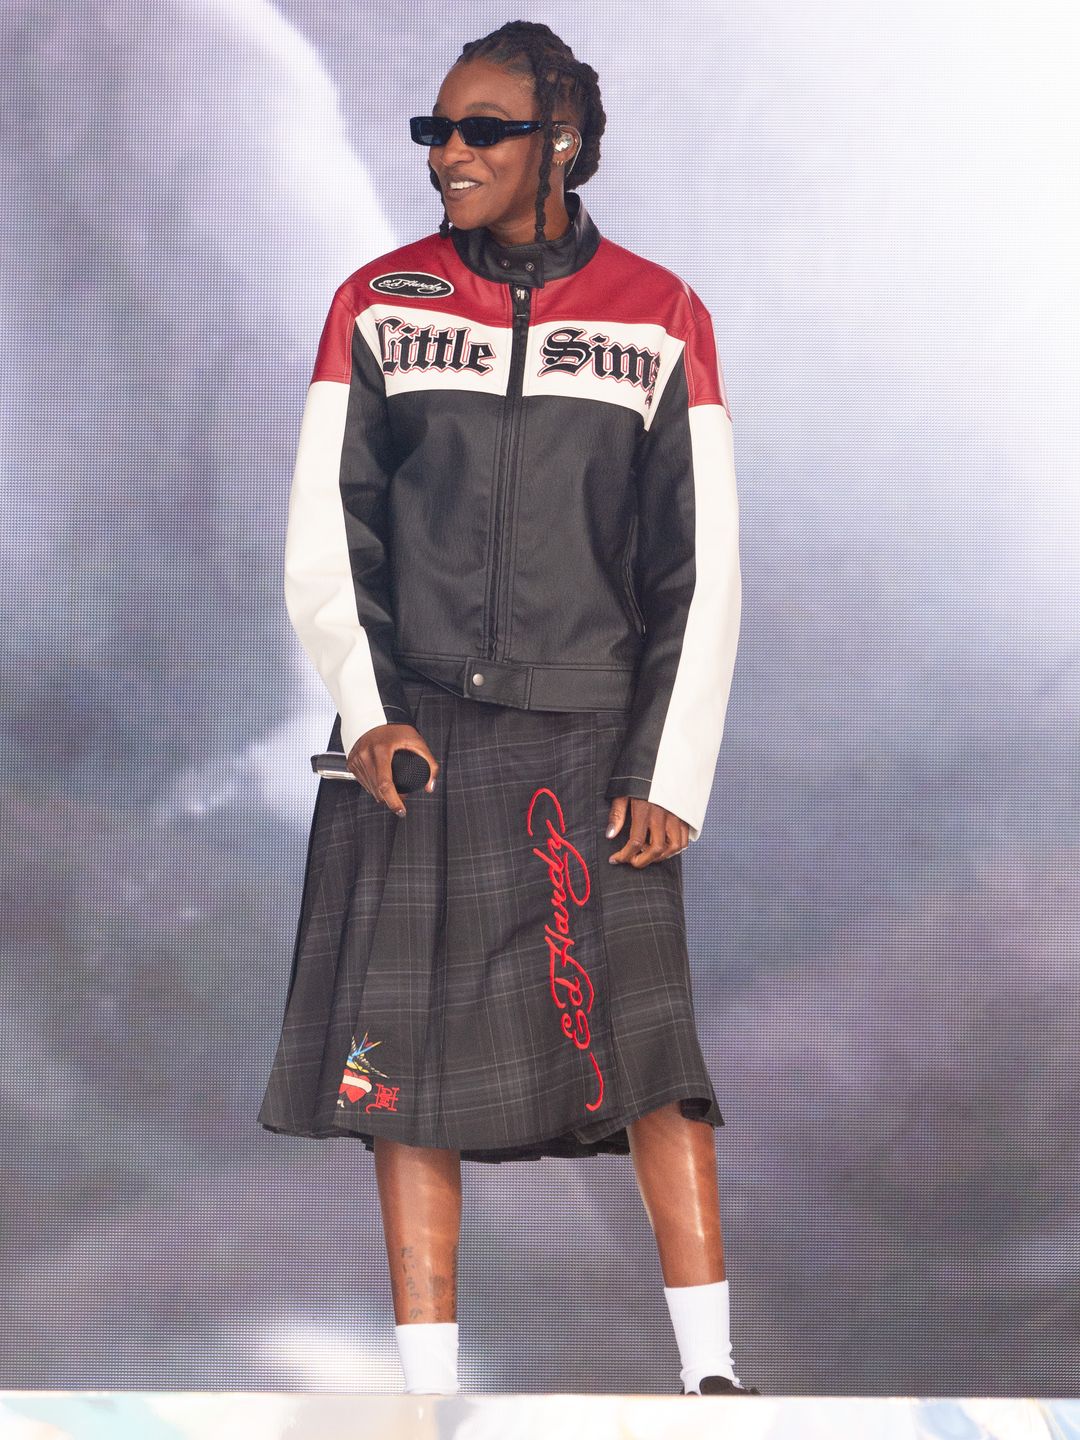 Little Simz performed wearing a customized motorbike jacket and Ed Hardy skirt